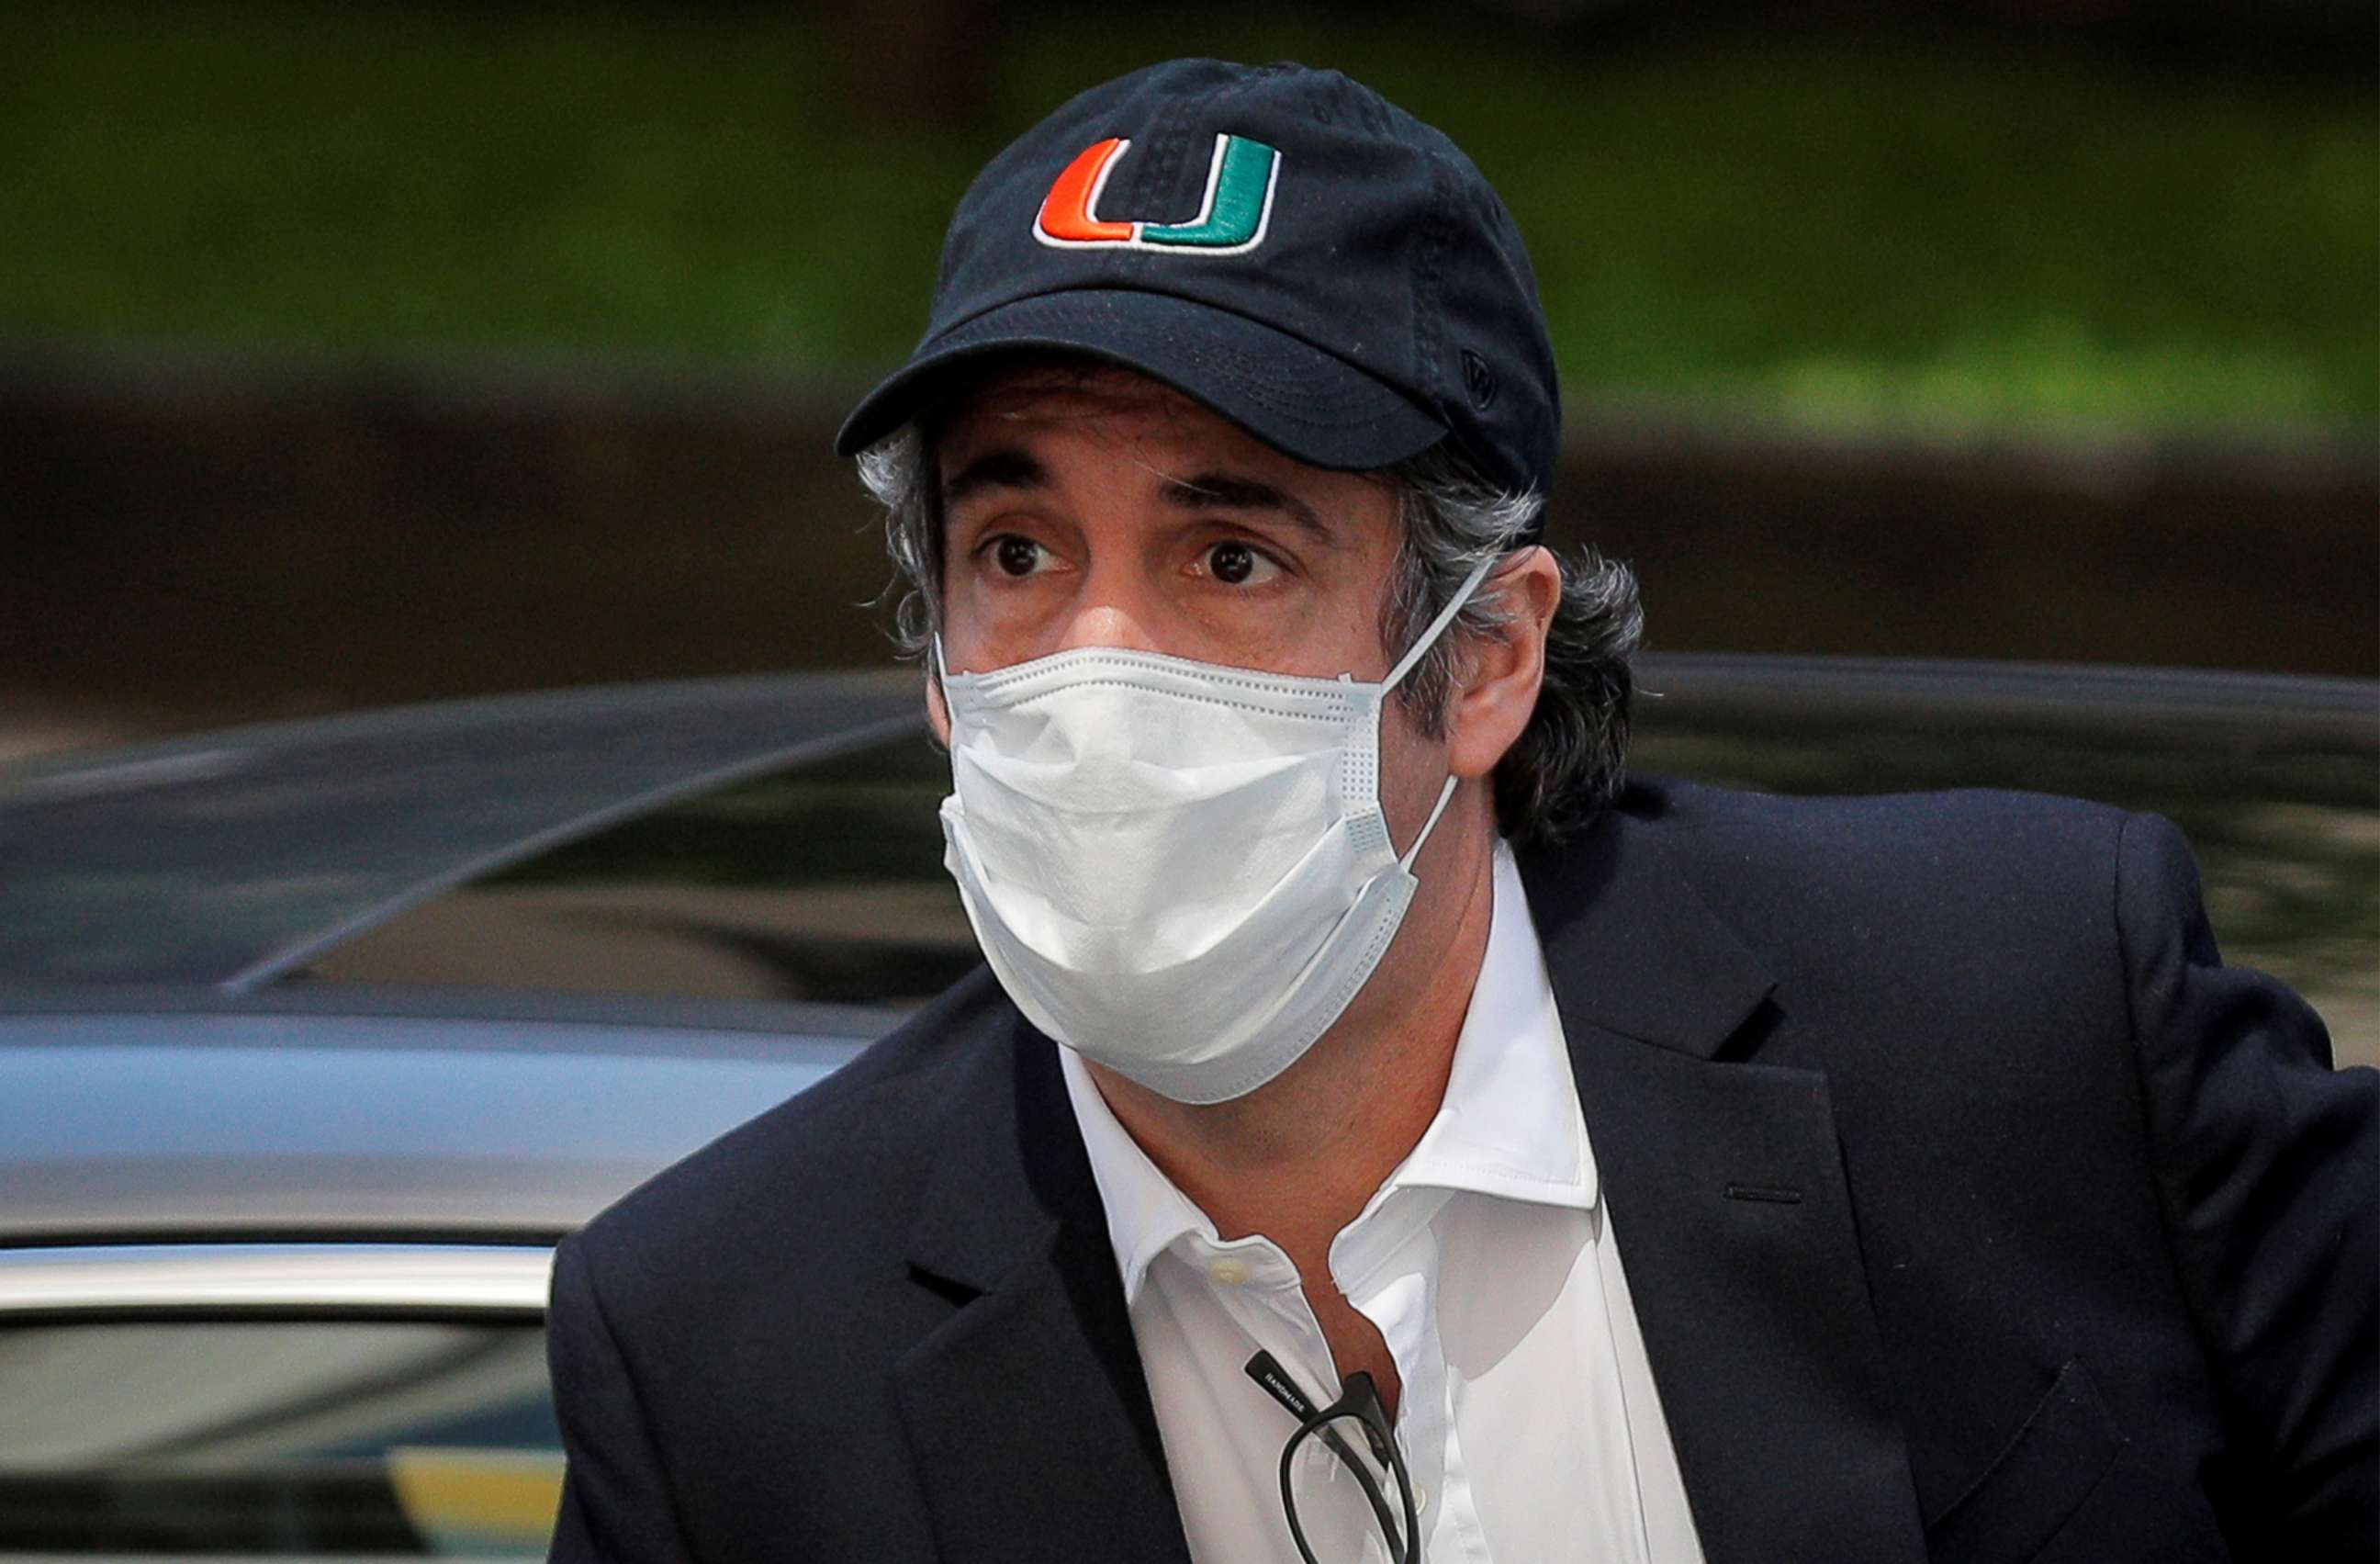 PHOTO: Michael Cohen, the former lawyer for U.S. President Donald Trump, arrives back at home after being released from prison during the outbreak of the coronavirus disease (COVID-19) in New York City, New York, May 21, 2020.